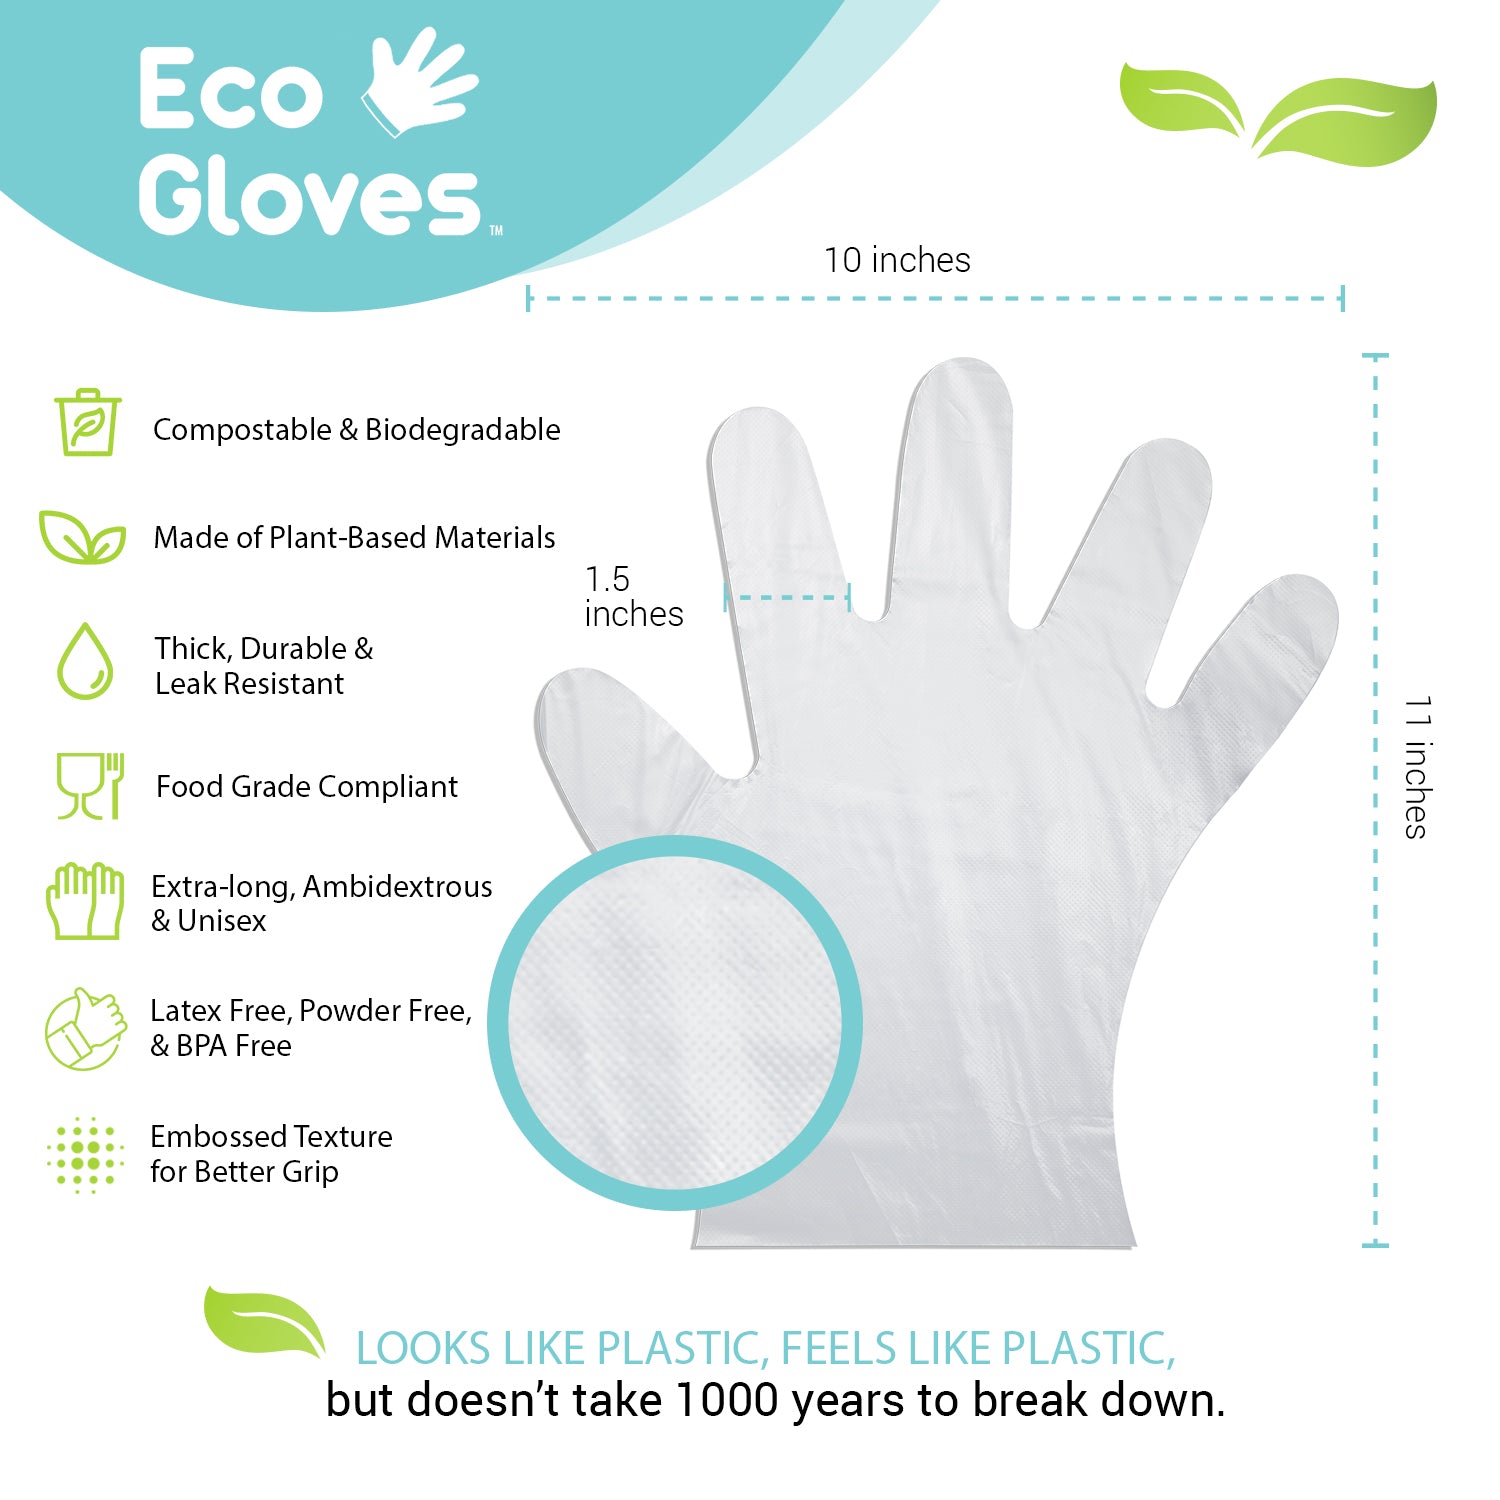 Individually Wrapped Disposable Gloves - 10 Pack